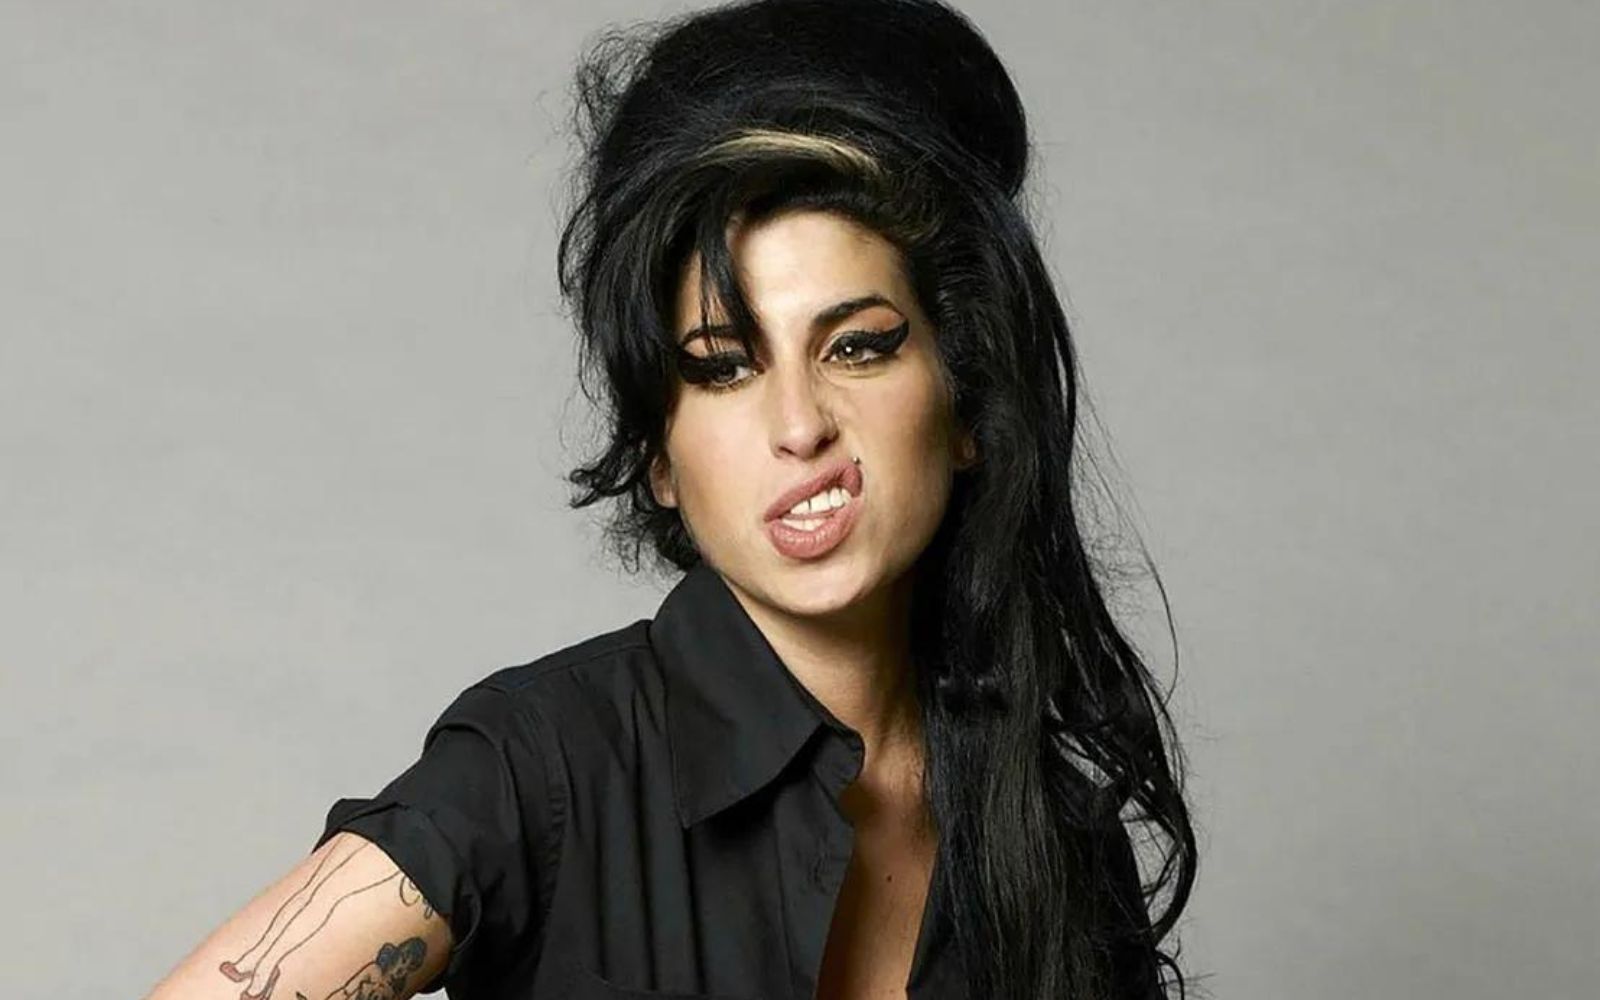 Back to black Amy Winehouse: the film causes controversy